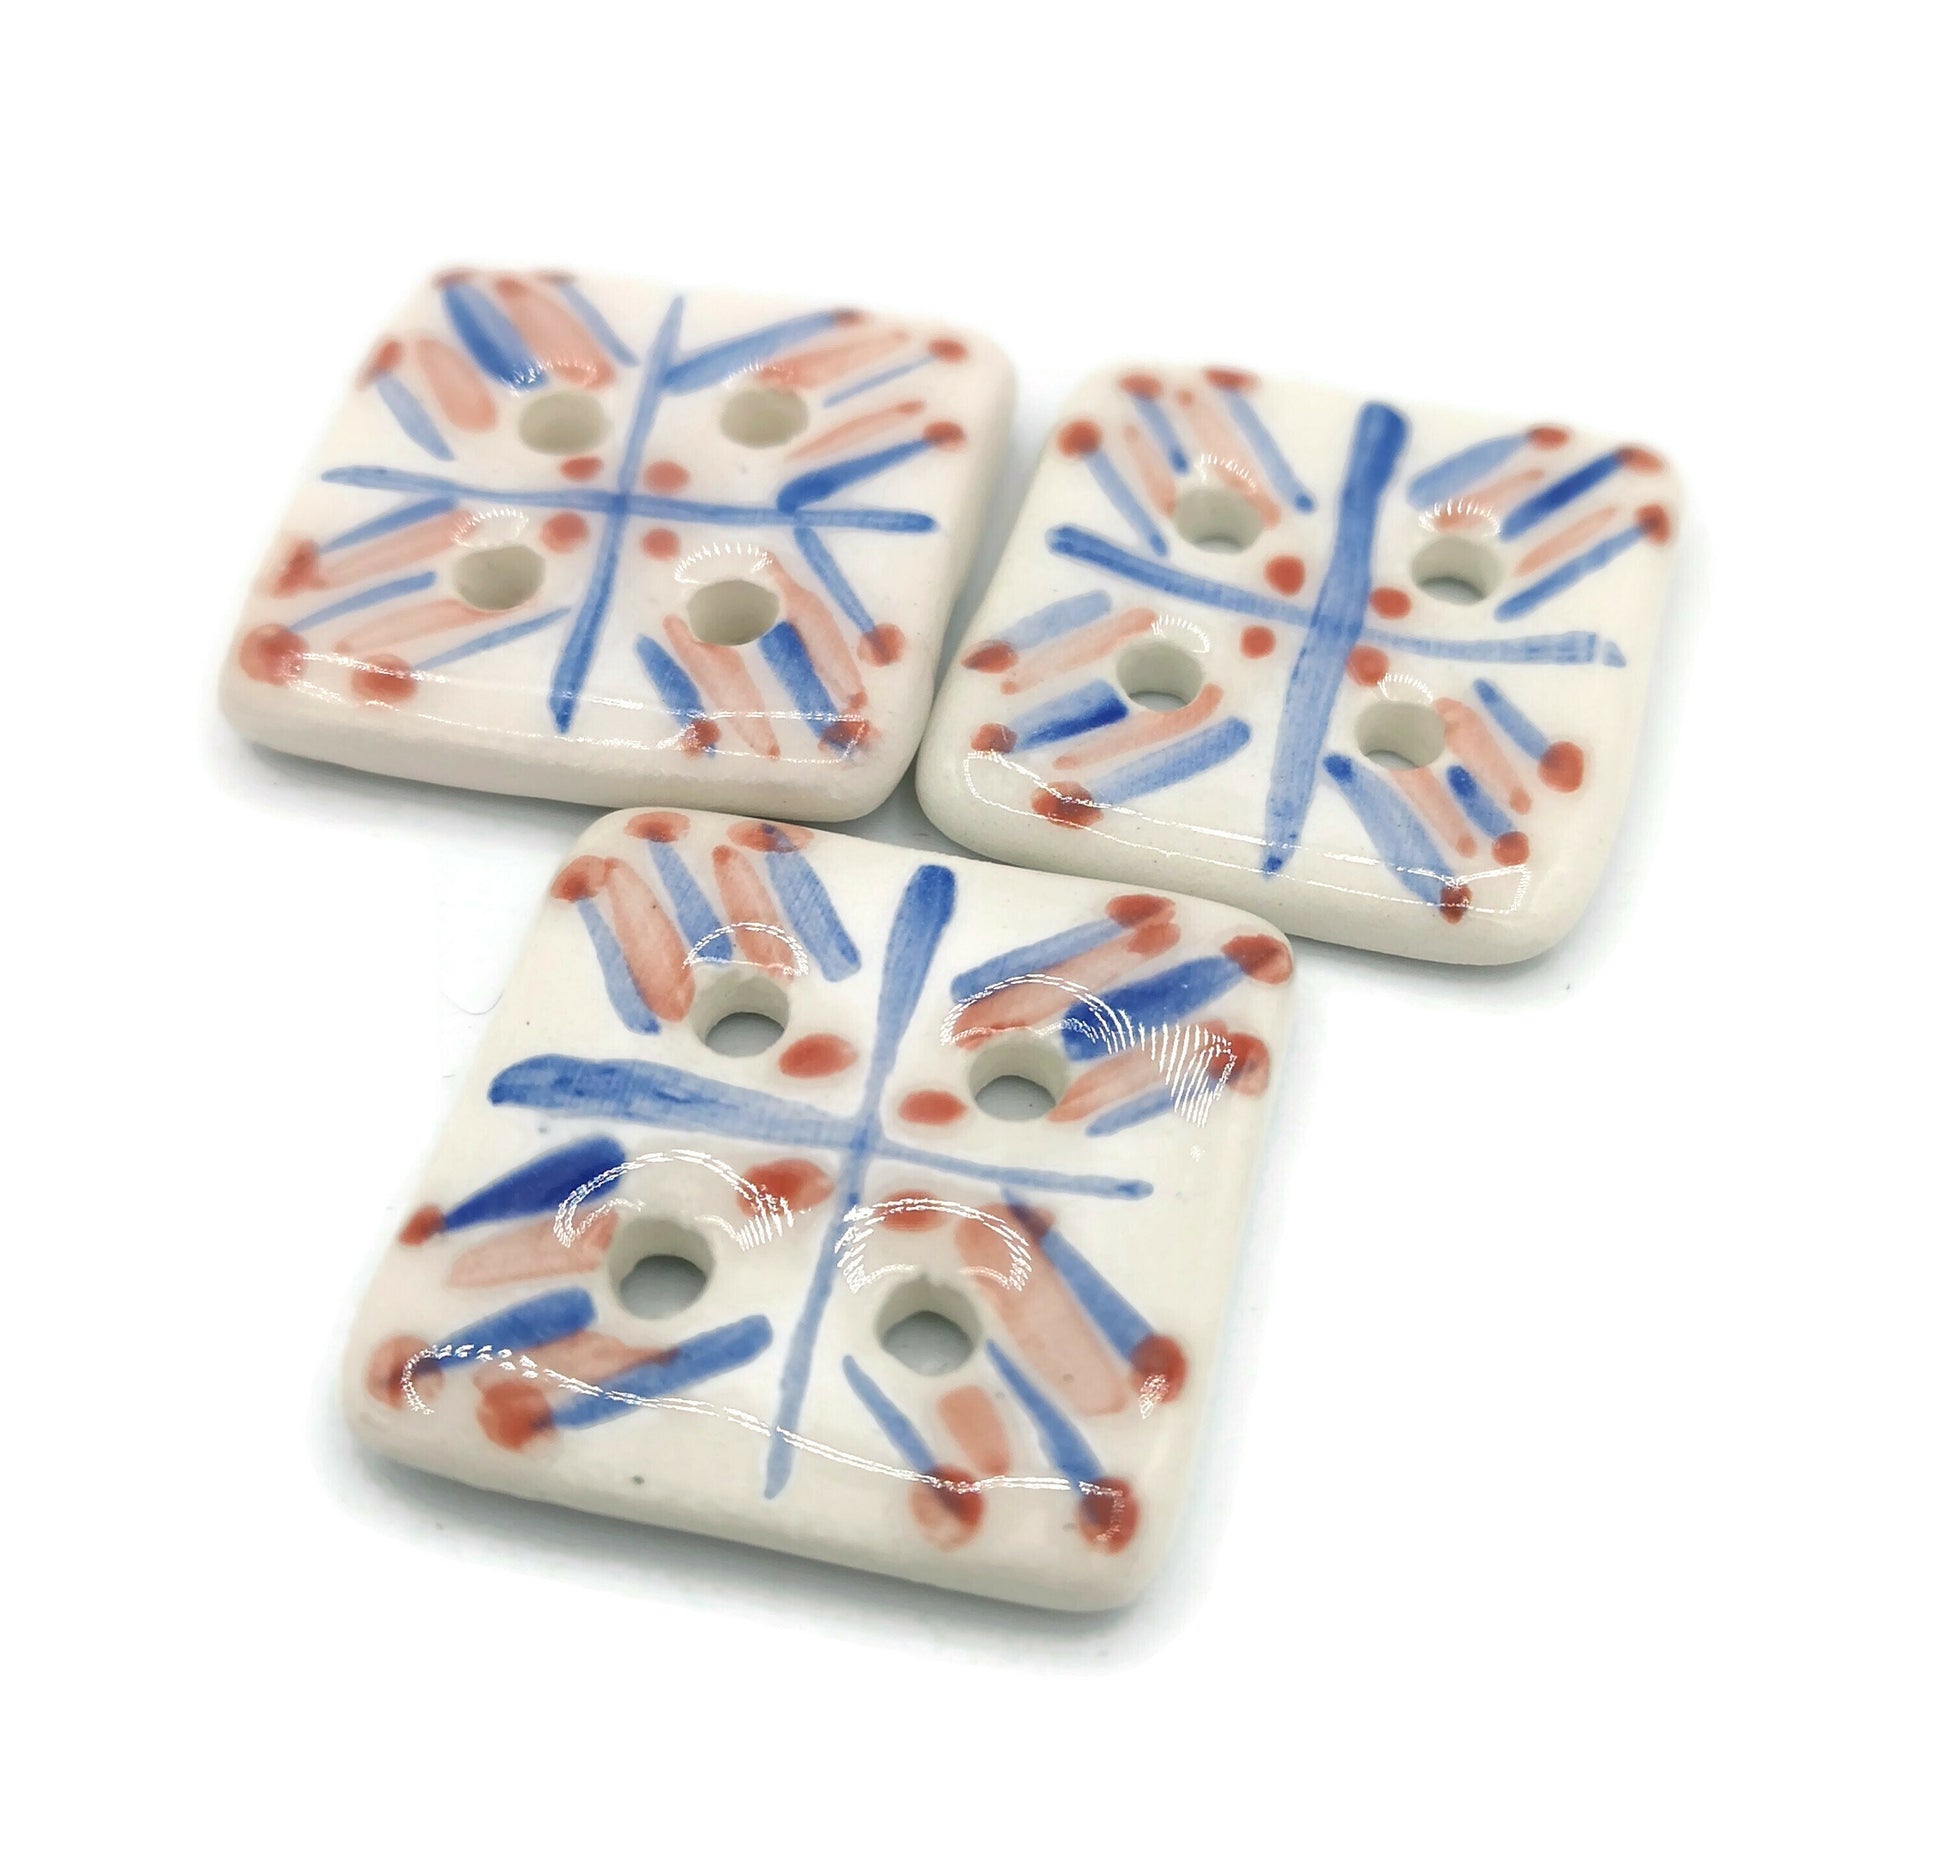 3Pcs 30mm Extra Large Buttons Square Shaped Fancy Clay Buttons, Handmade Ceramic Jacket Cute Buttons For Blouse, Hand Painted Coat Buttons - Ceramica Ana Rafael